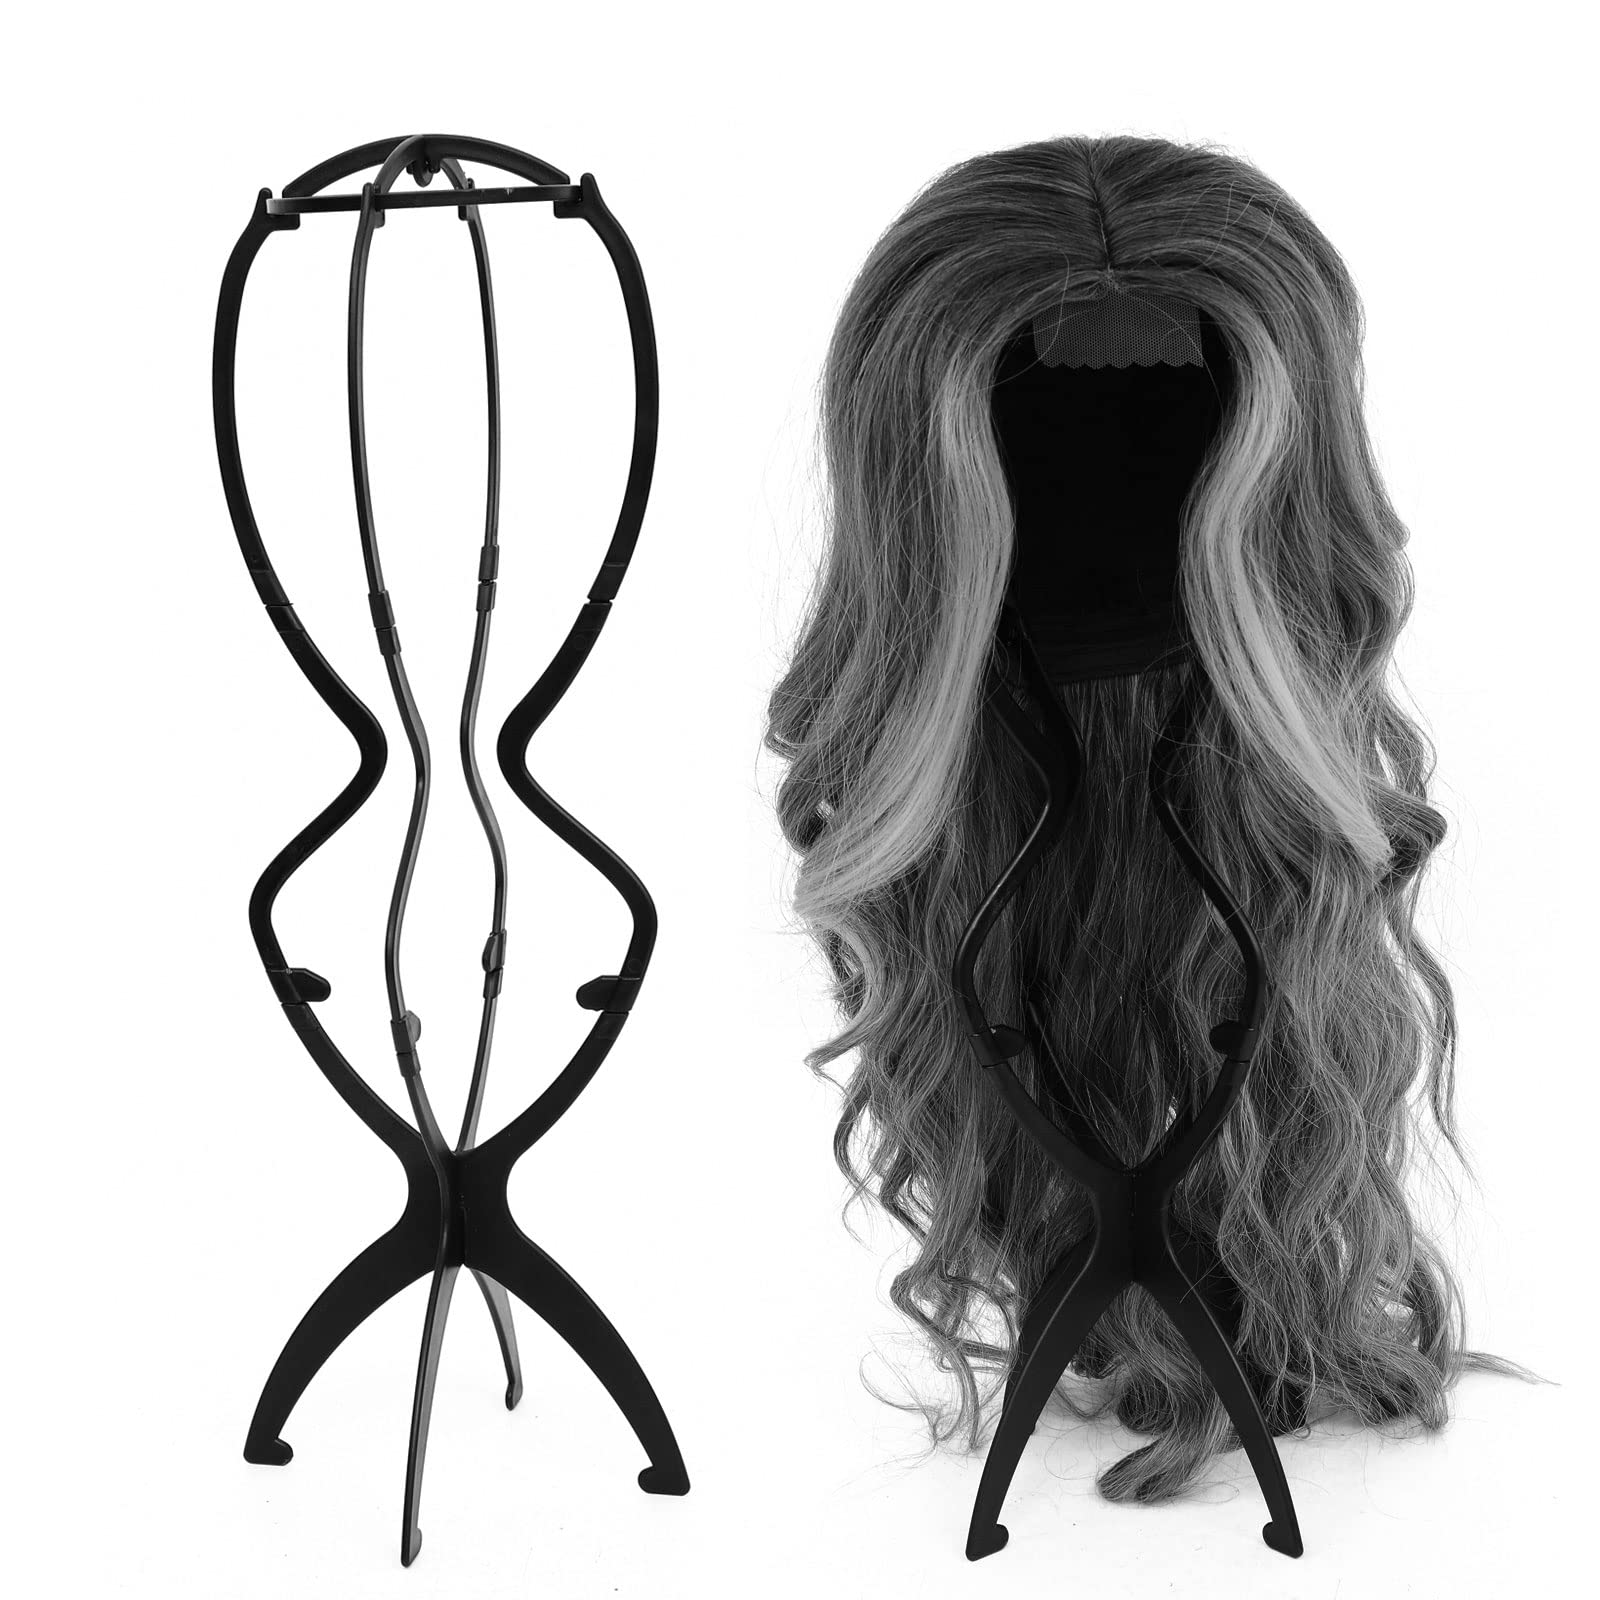 PIESOYRI Tall Wig Stands, Wig Head Stand for Long Wigs, 2 Pack, 19.7,  Portable Collapsible Wig Holders Foldable Wig Stand 19.7-2PCS